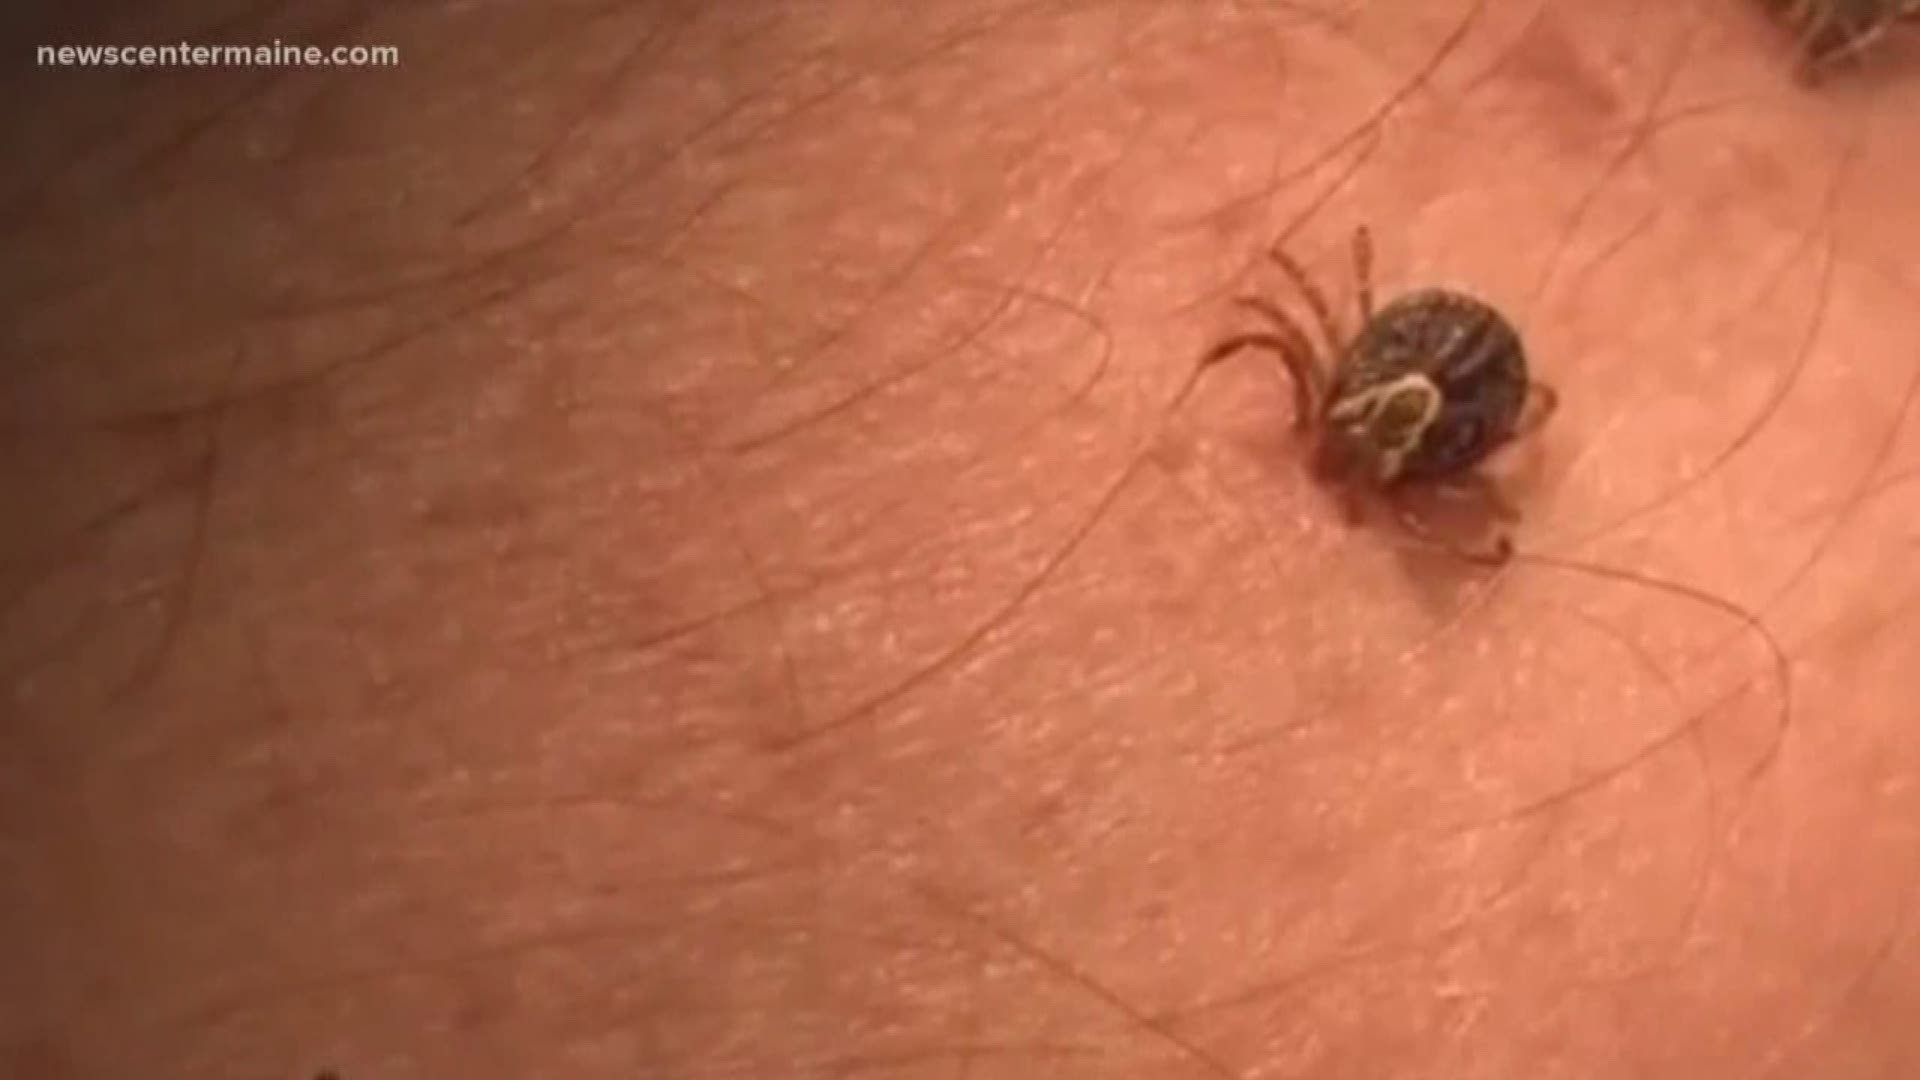 These are some of the safest ways to protect your children from tick-borne diseases.